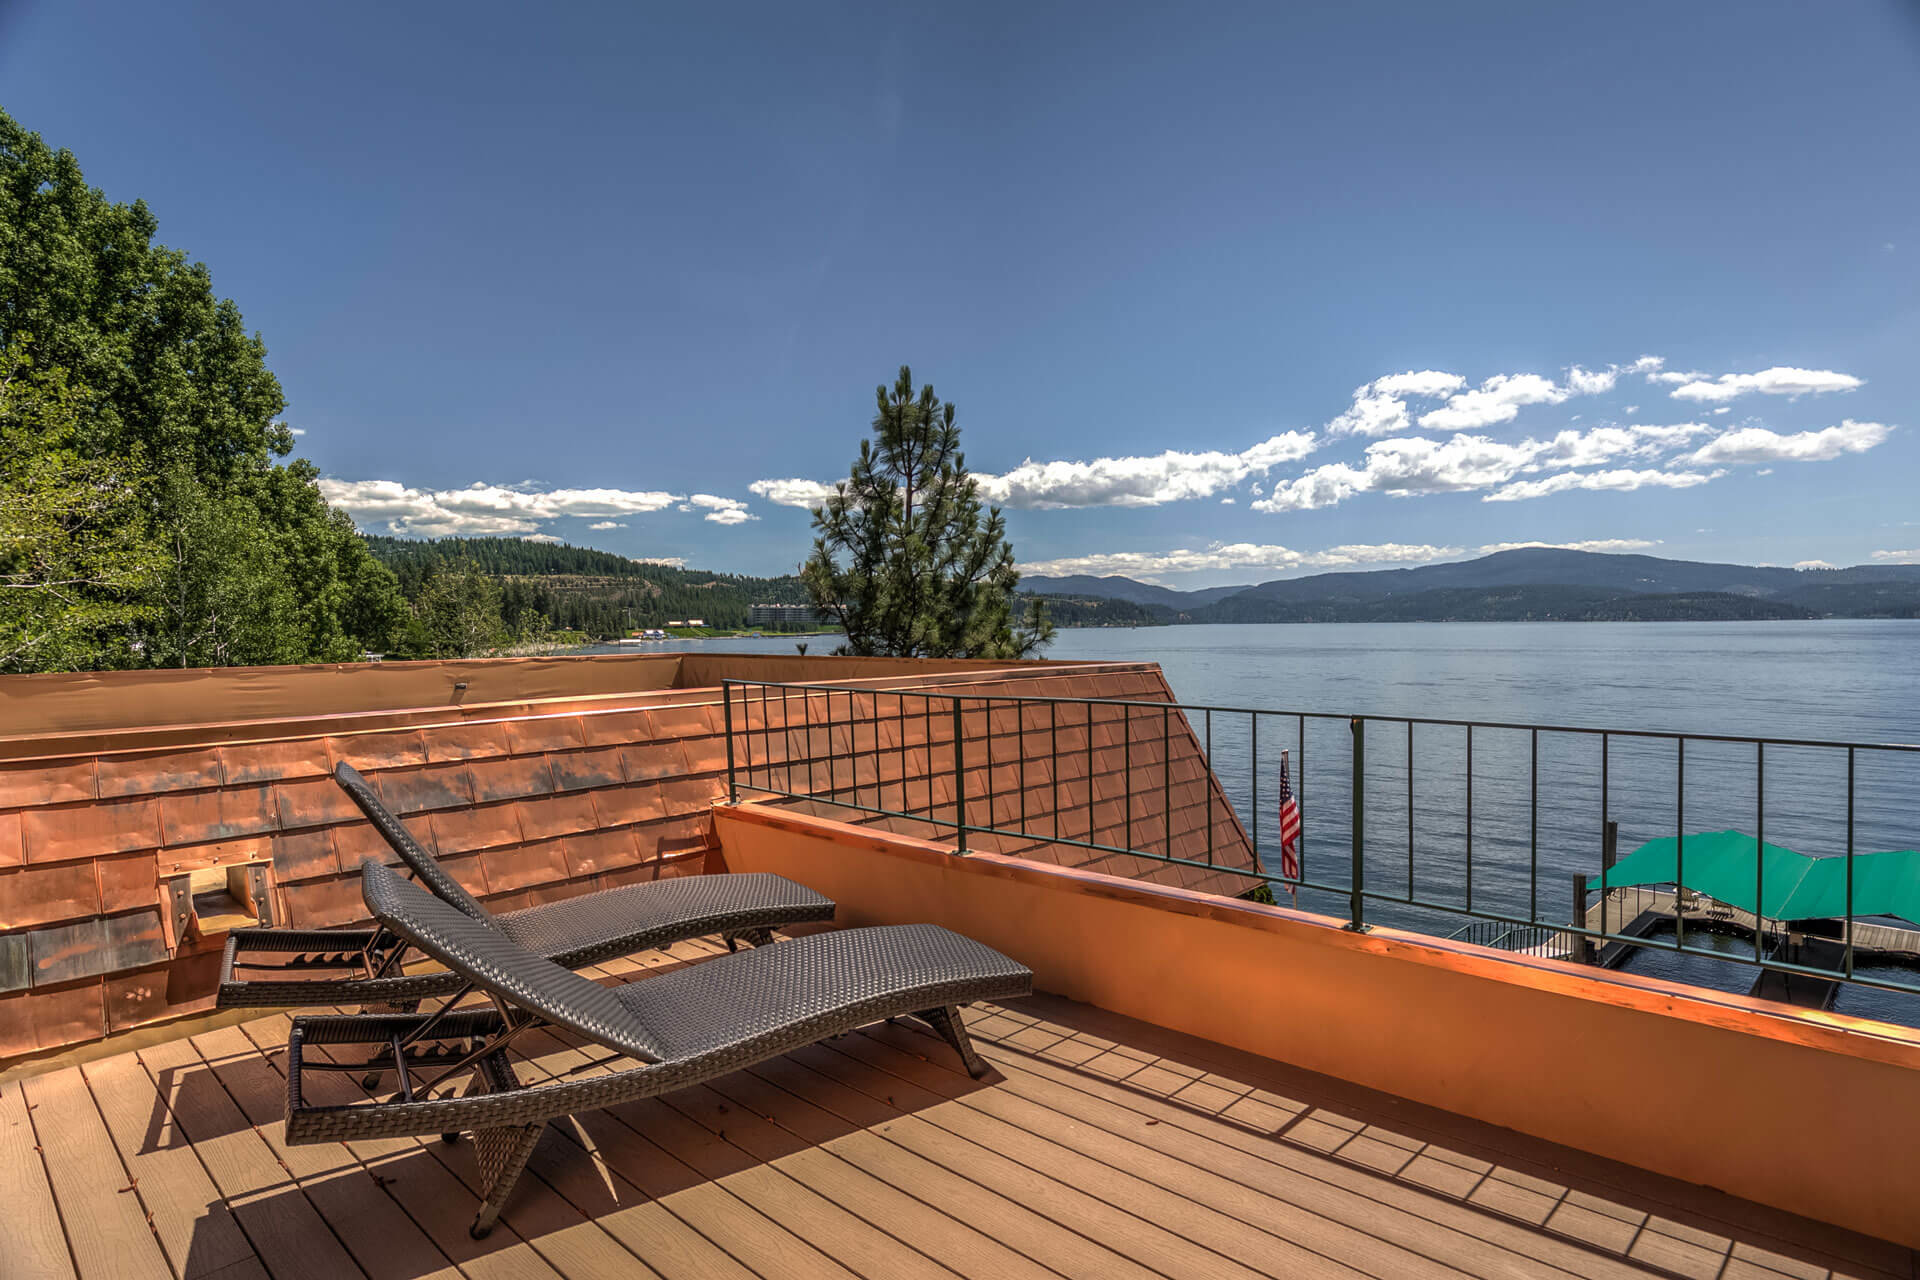 Balcony with amazing lake view on sunny day